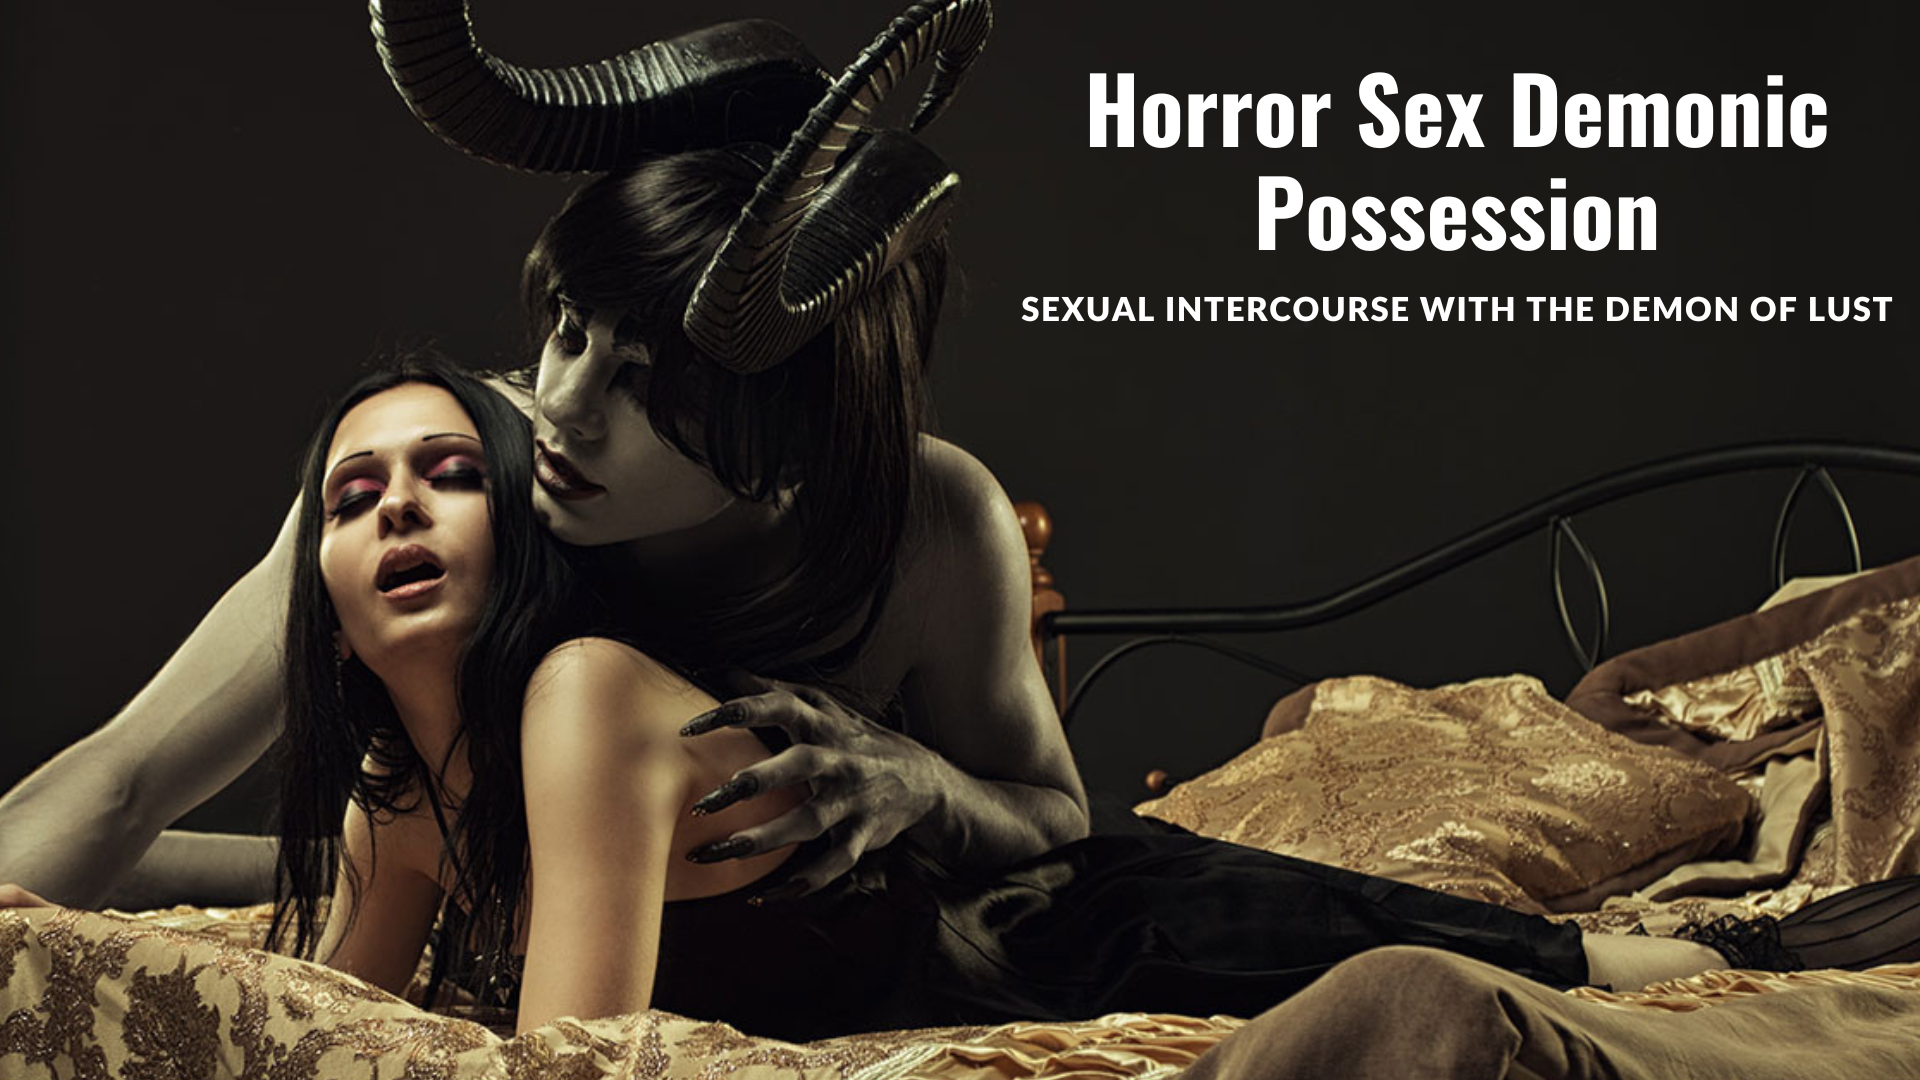 Horror Sex Demonic Possession - Sexual Intercourse With The Demon Of Lust